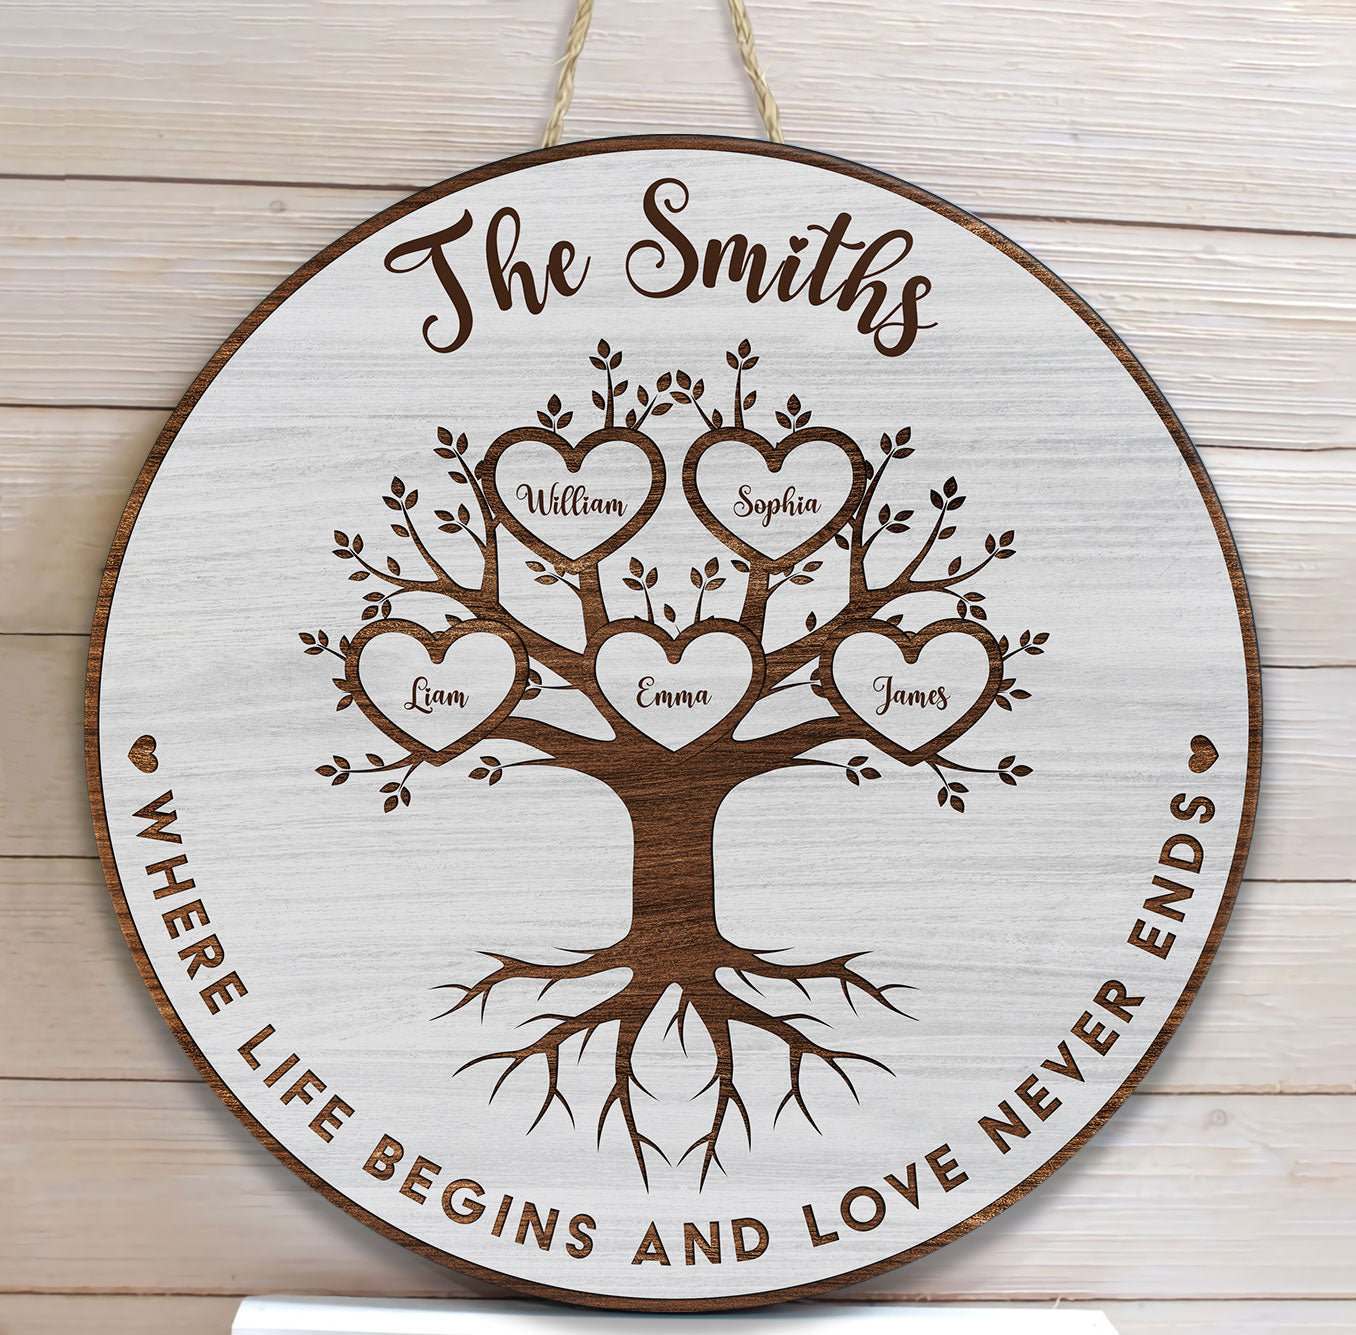 Family Love Never Ends - Personalized Round Wood Sign